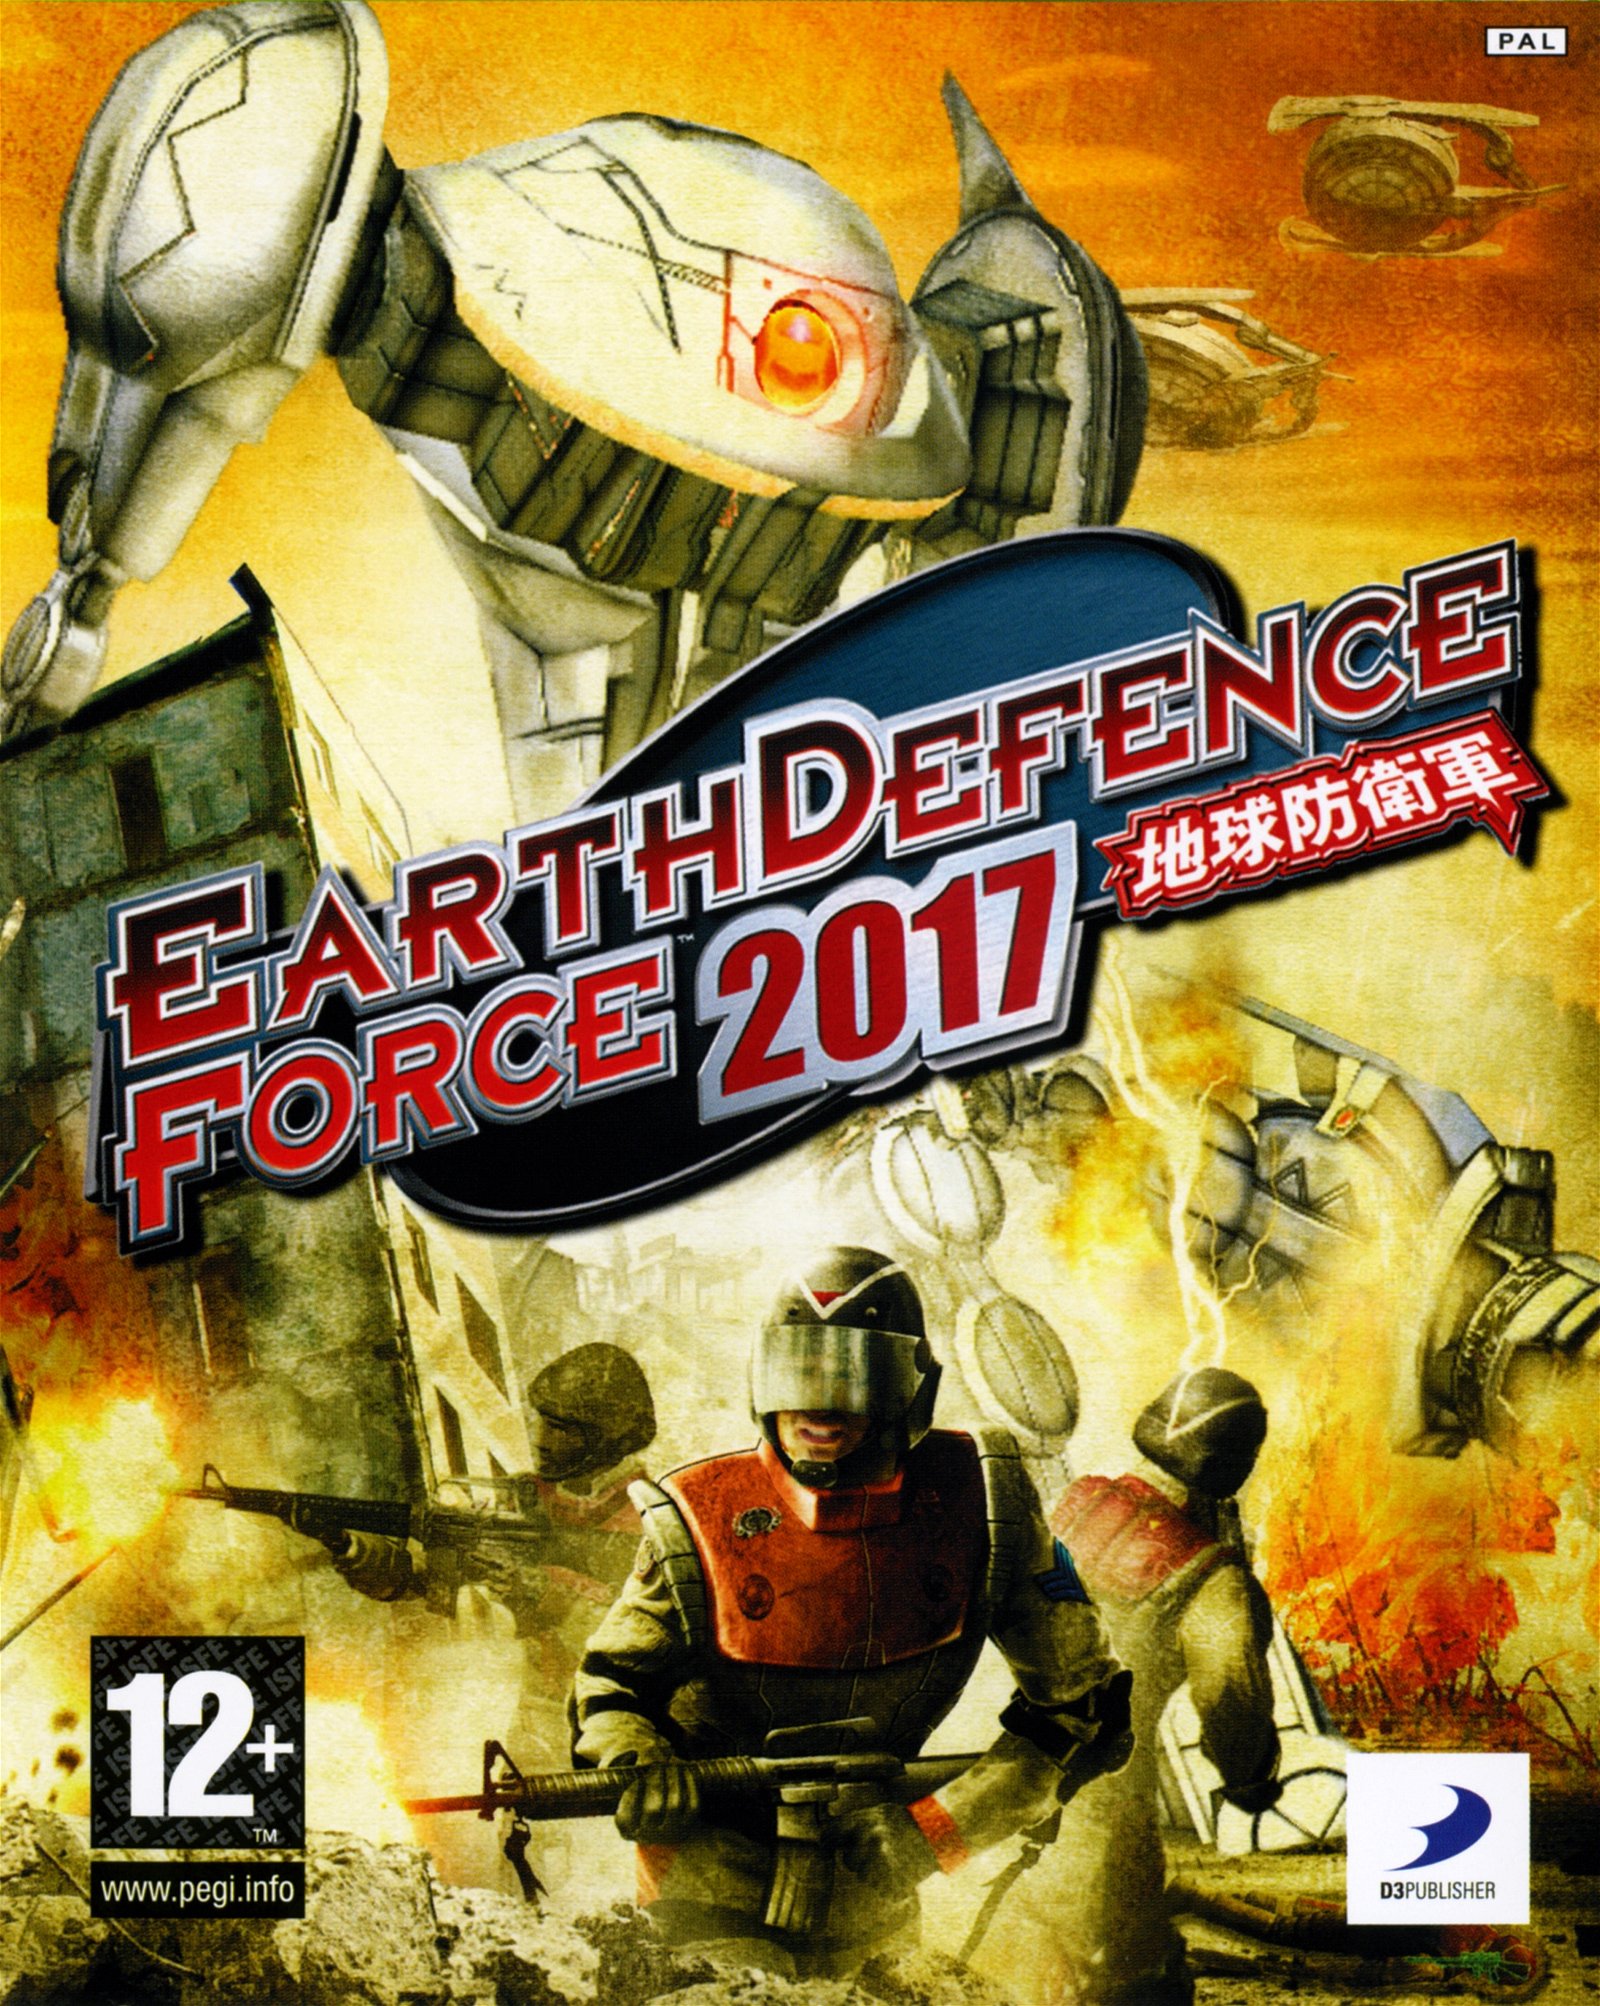 Image of Earth Defense Force 2017